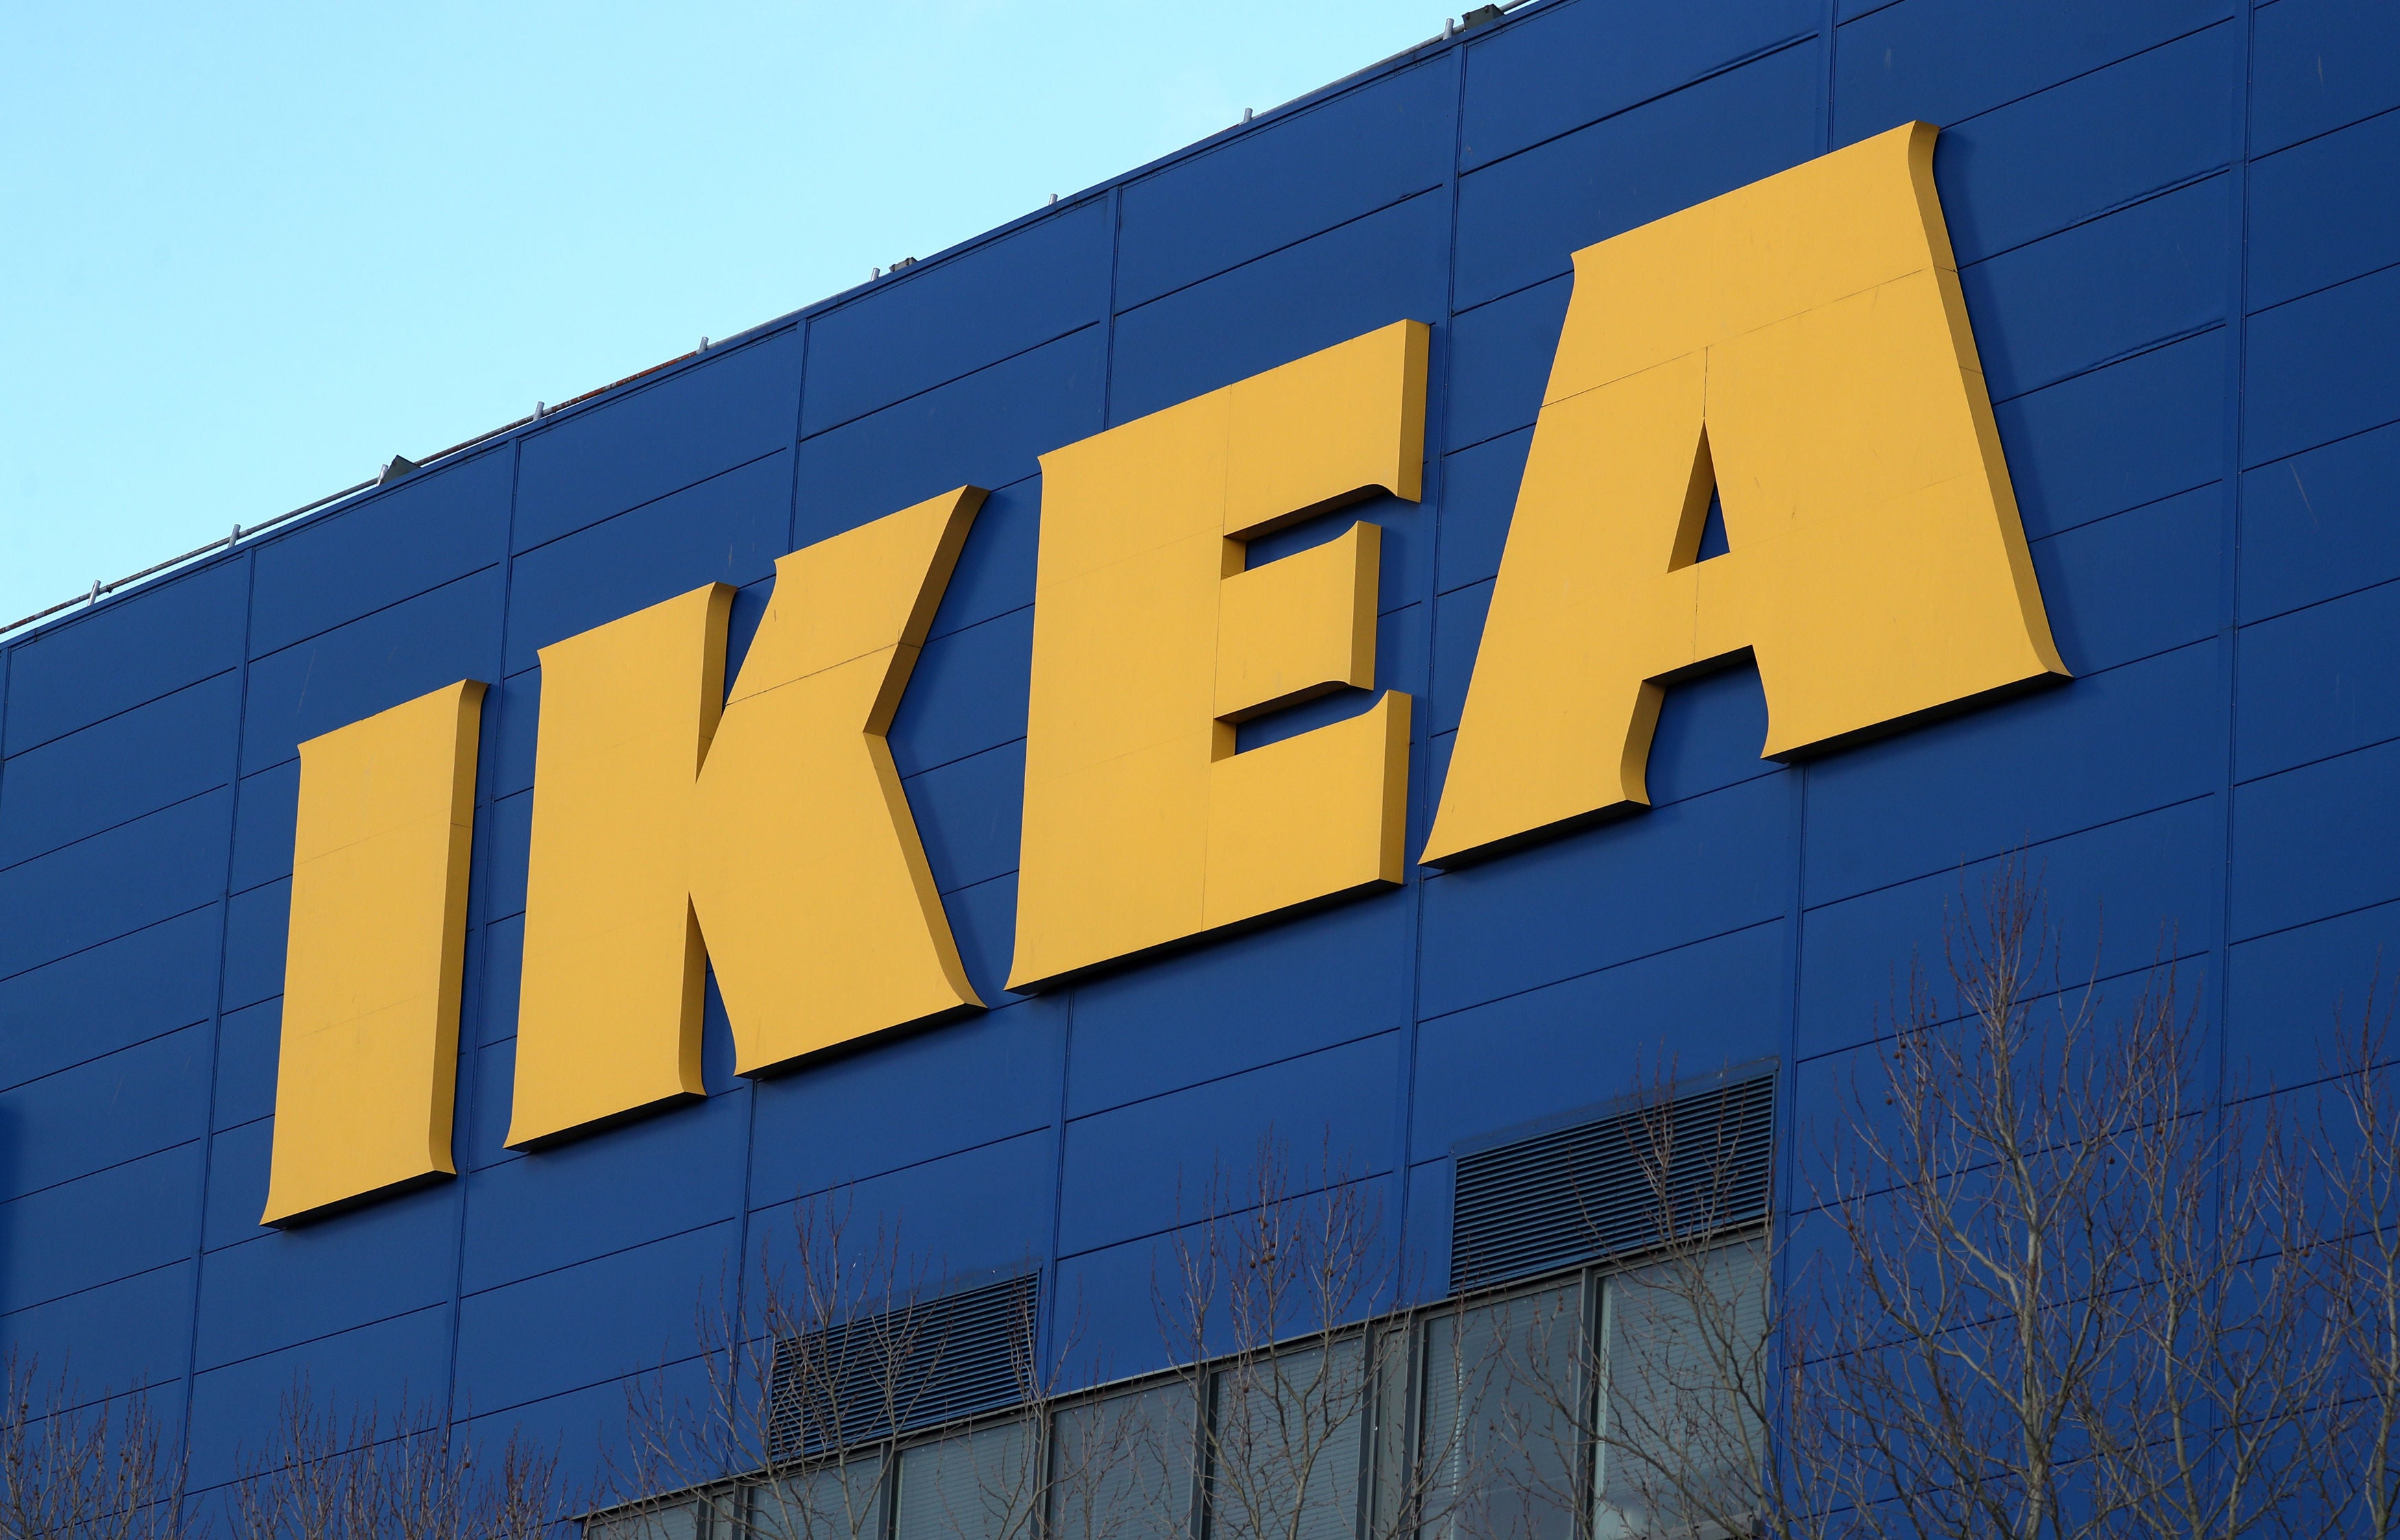 IKEA has launched an internal investigation into the discovery